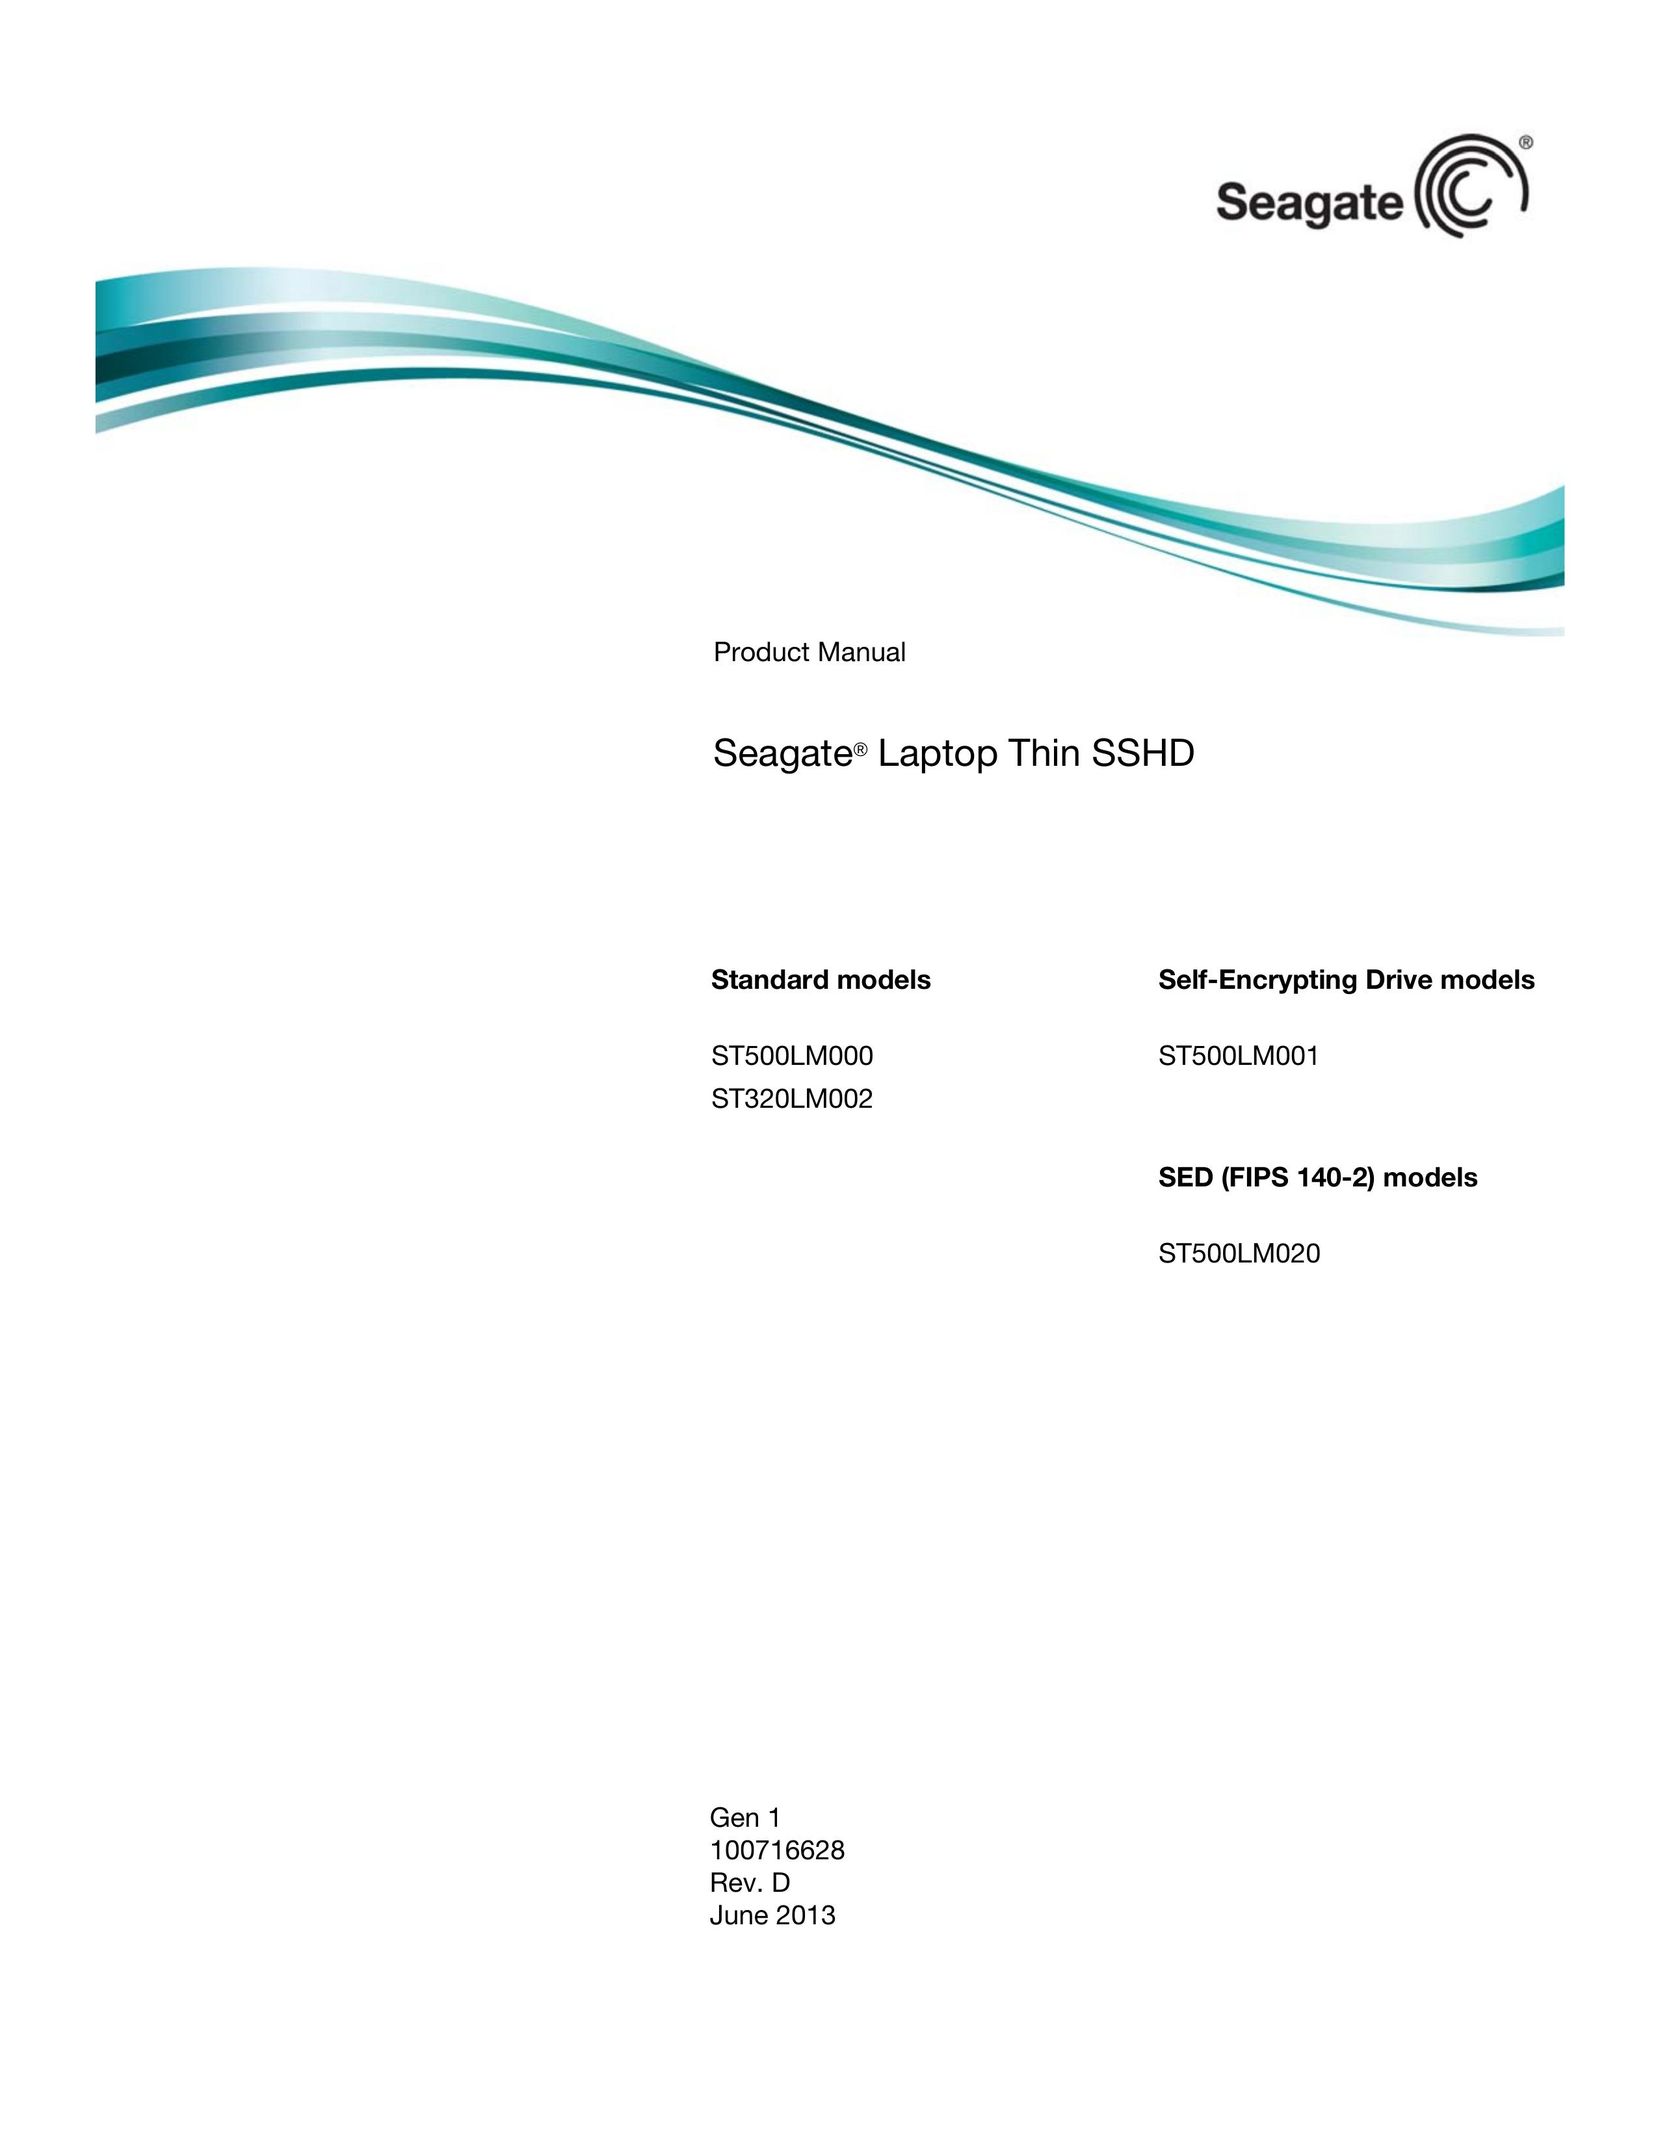 Seagate ST320LM002 Laptop User Manual